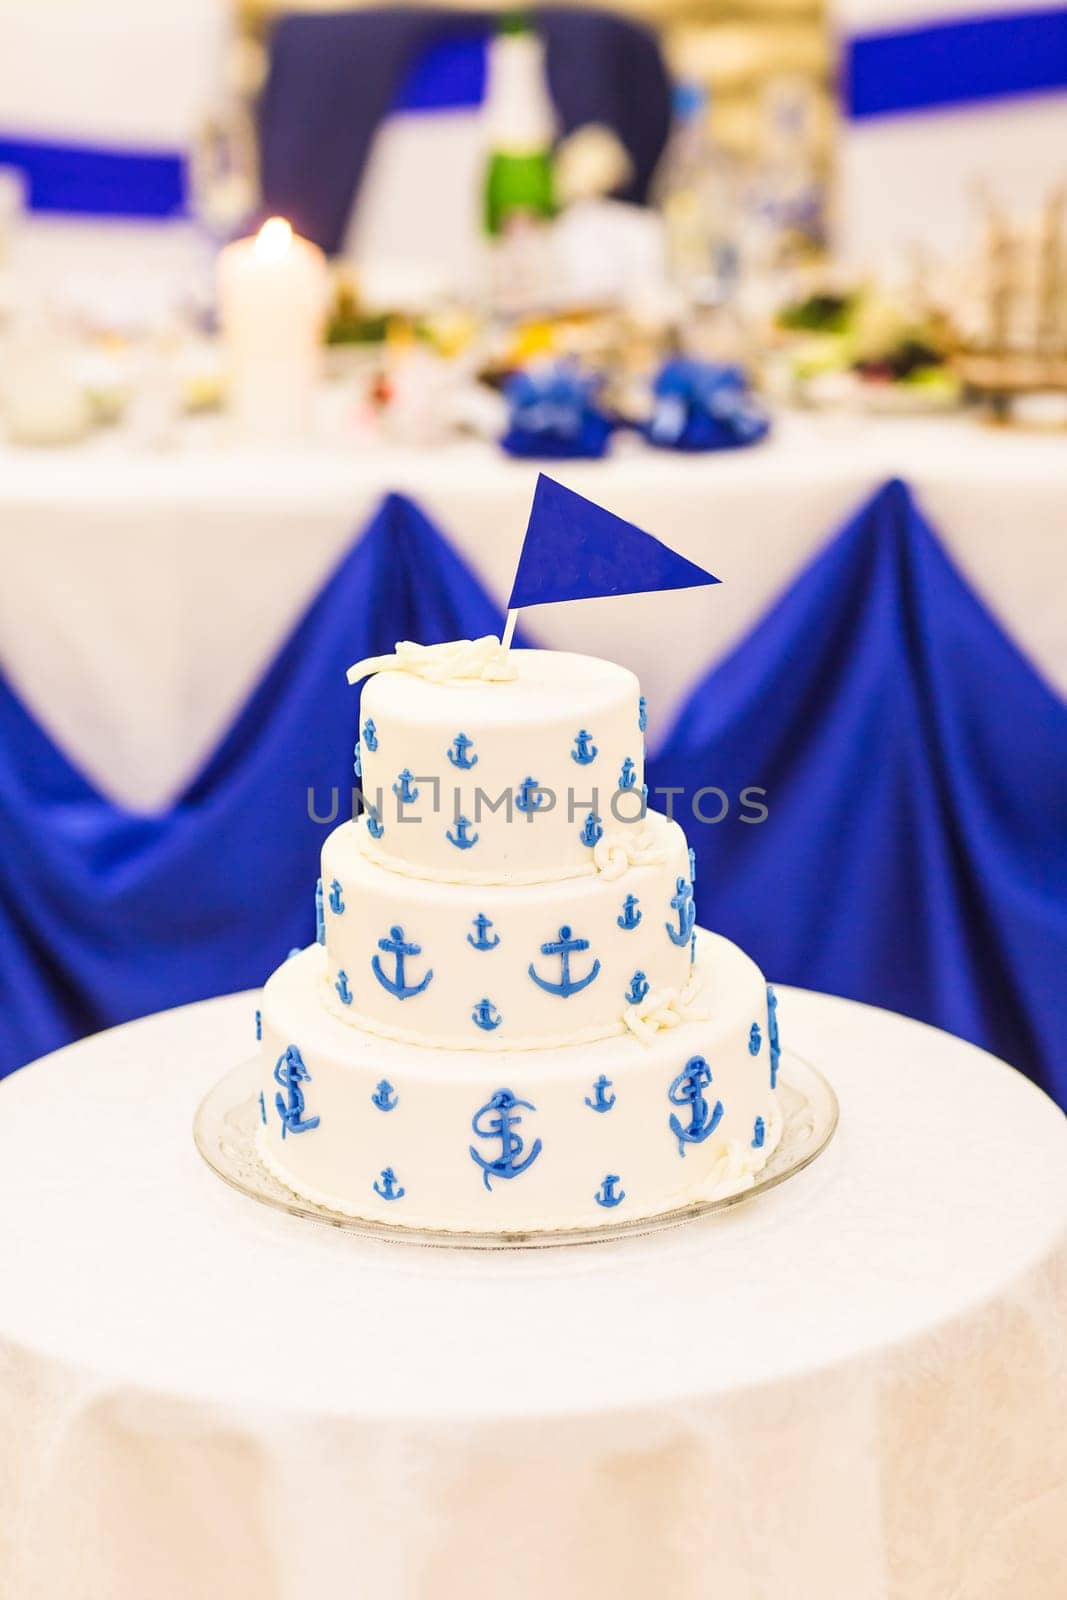 A traditional and decorative wedding cake at wedding reception.